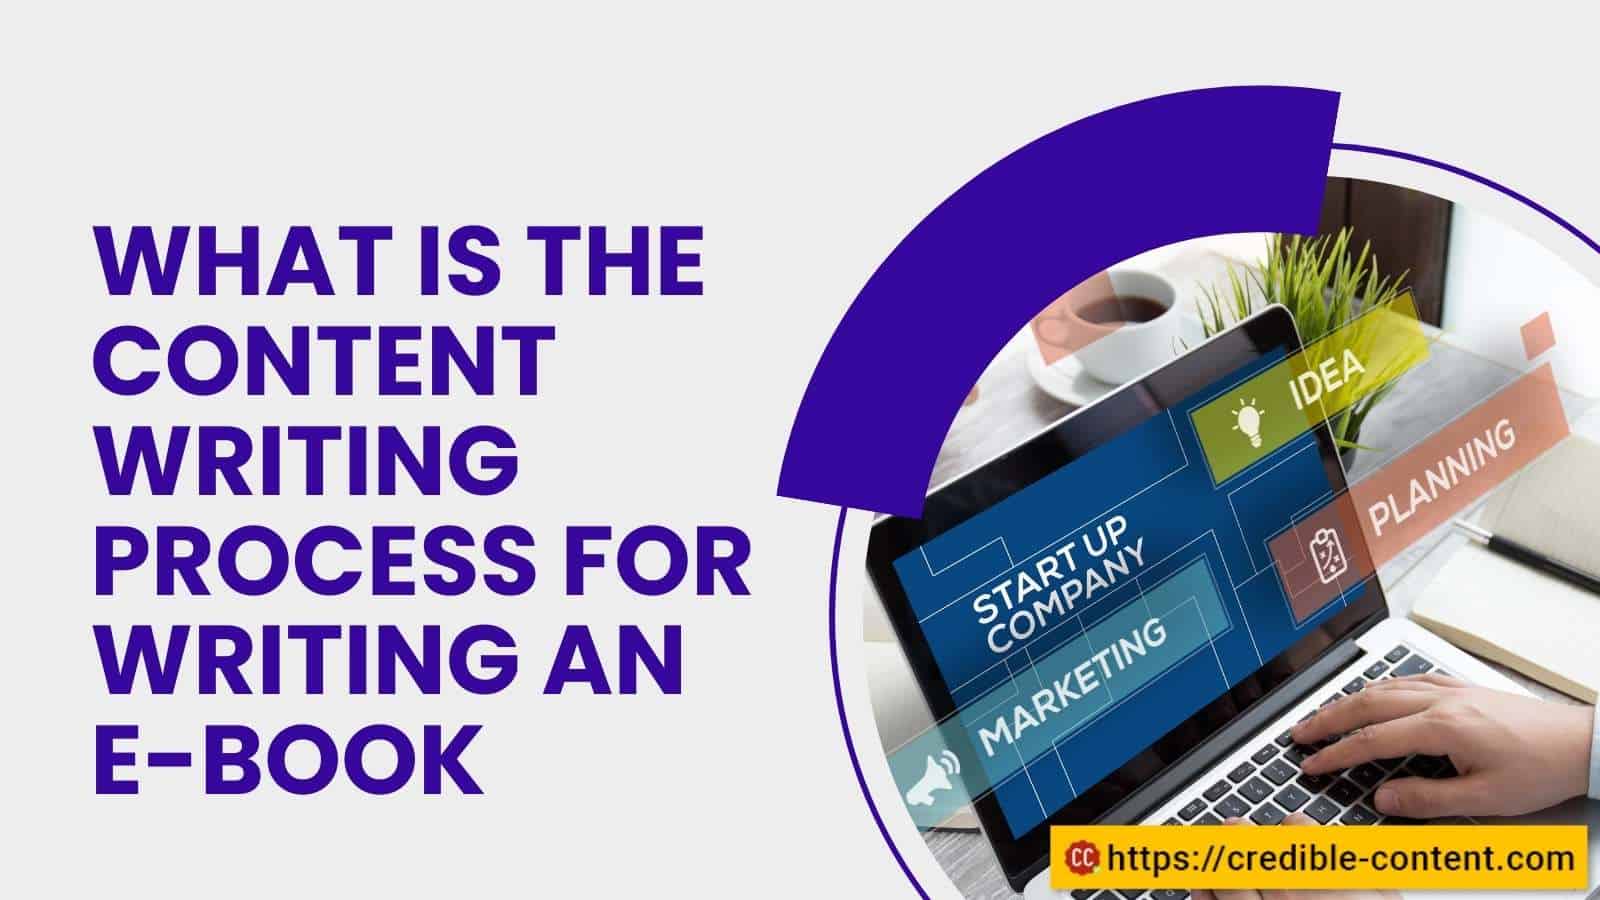 What is the content writing process for writing an e-book